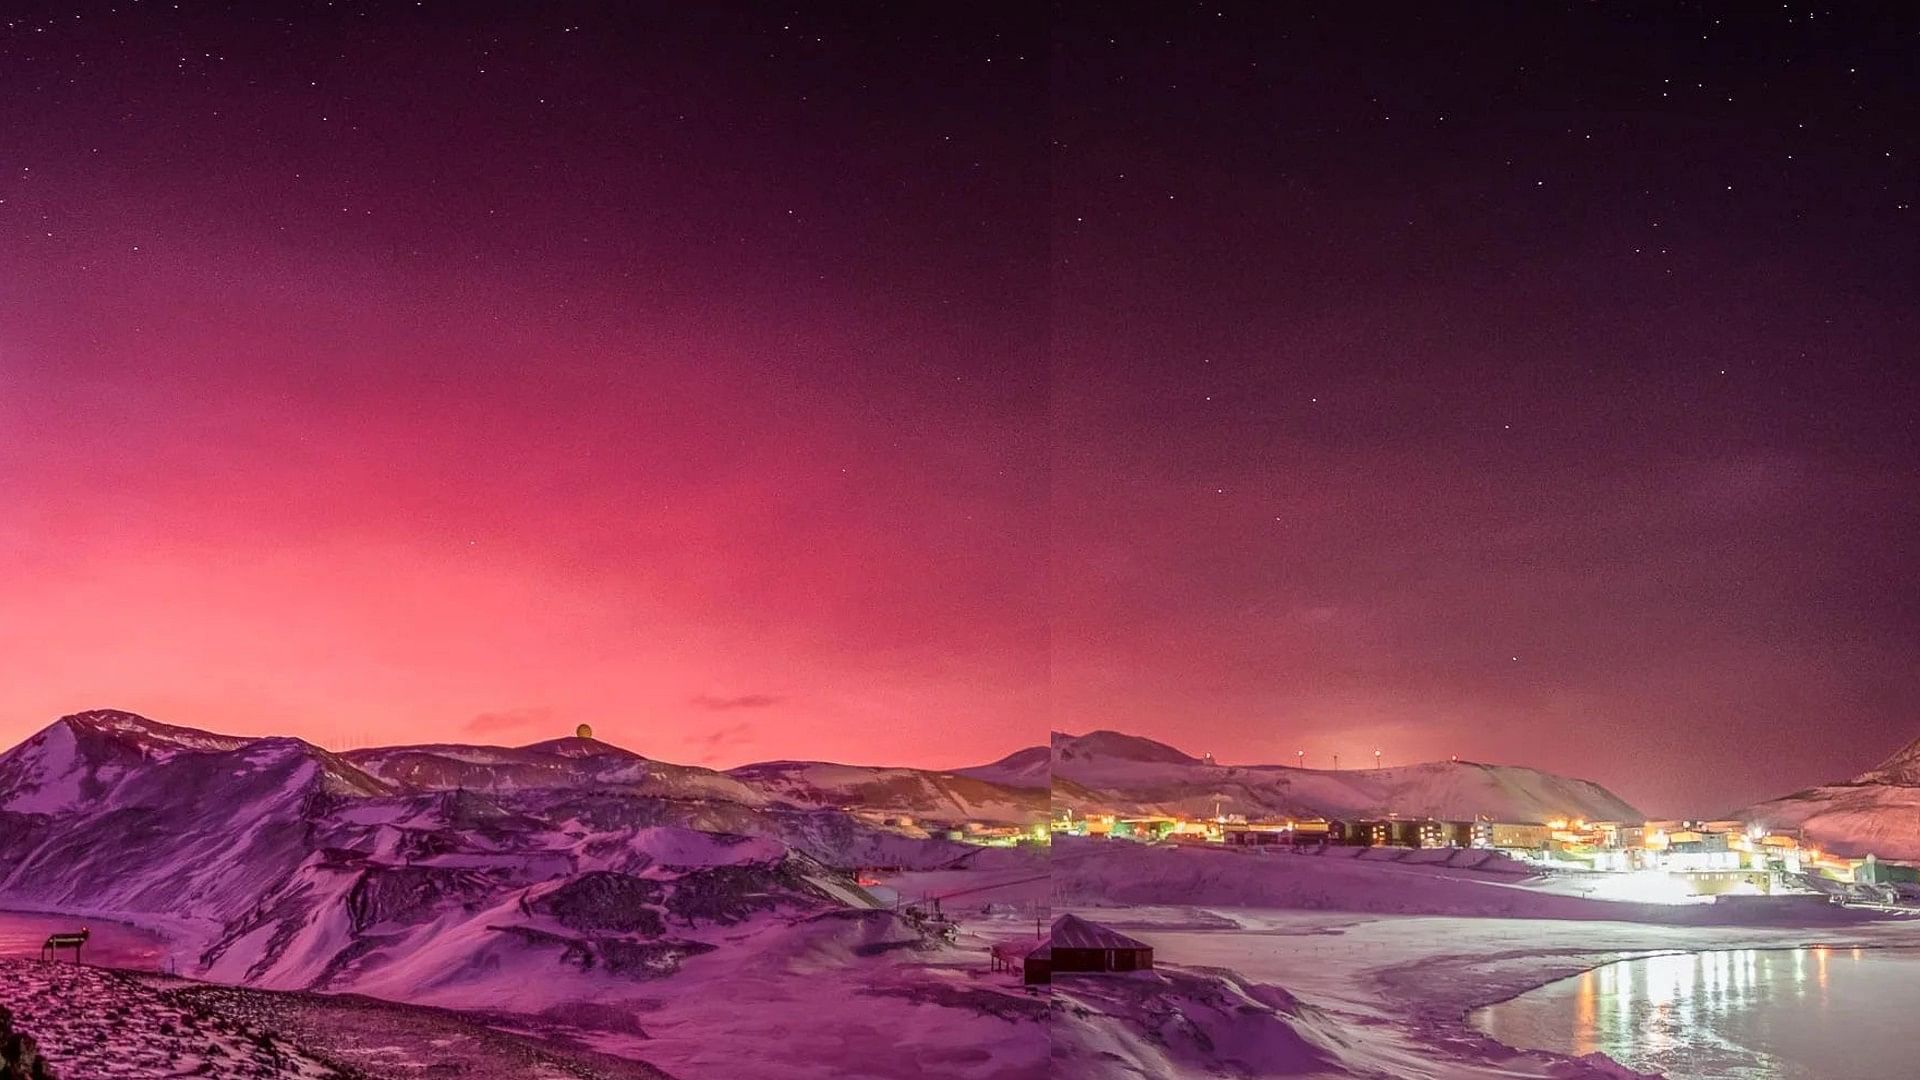 pink shade in sky due to eruption of tonga volcano pictures going viral on social media